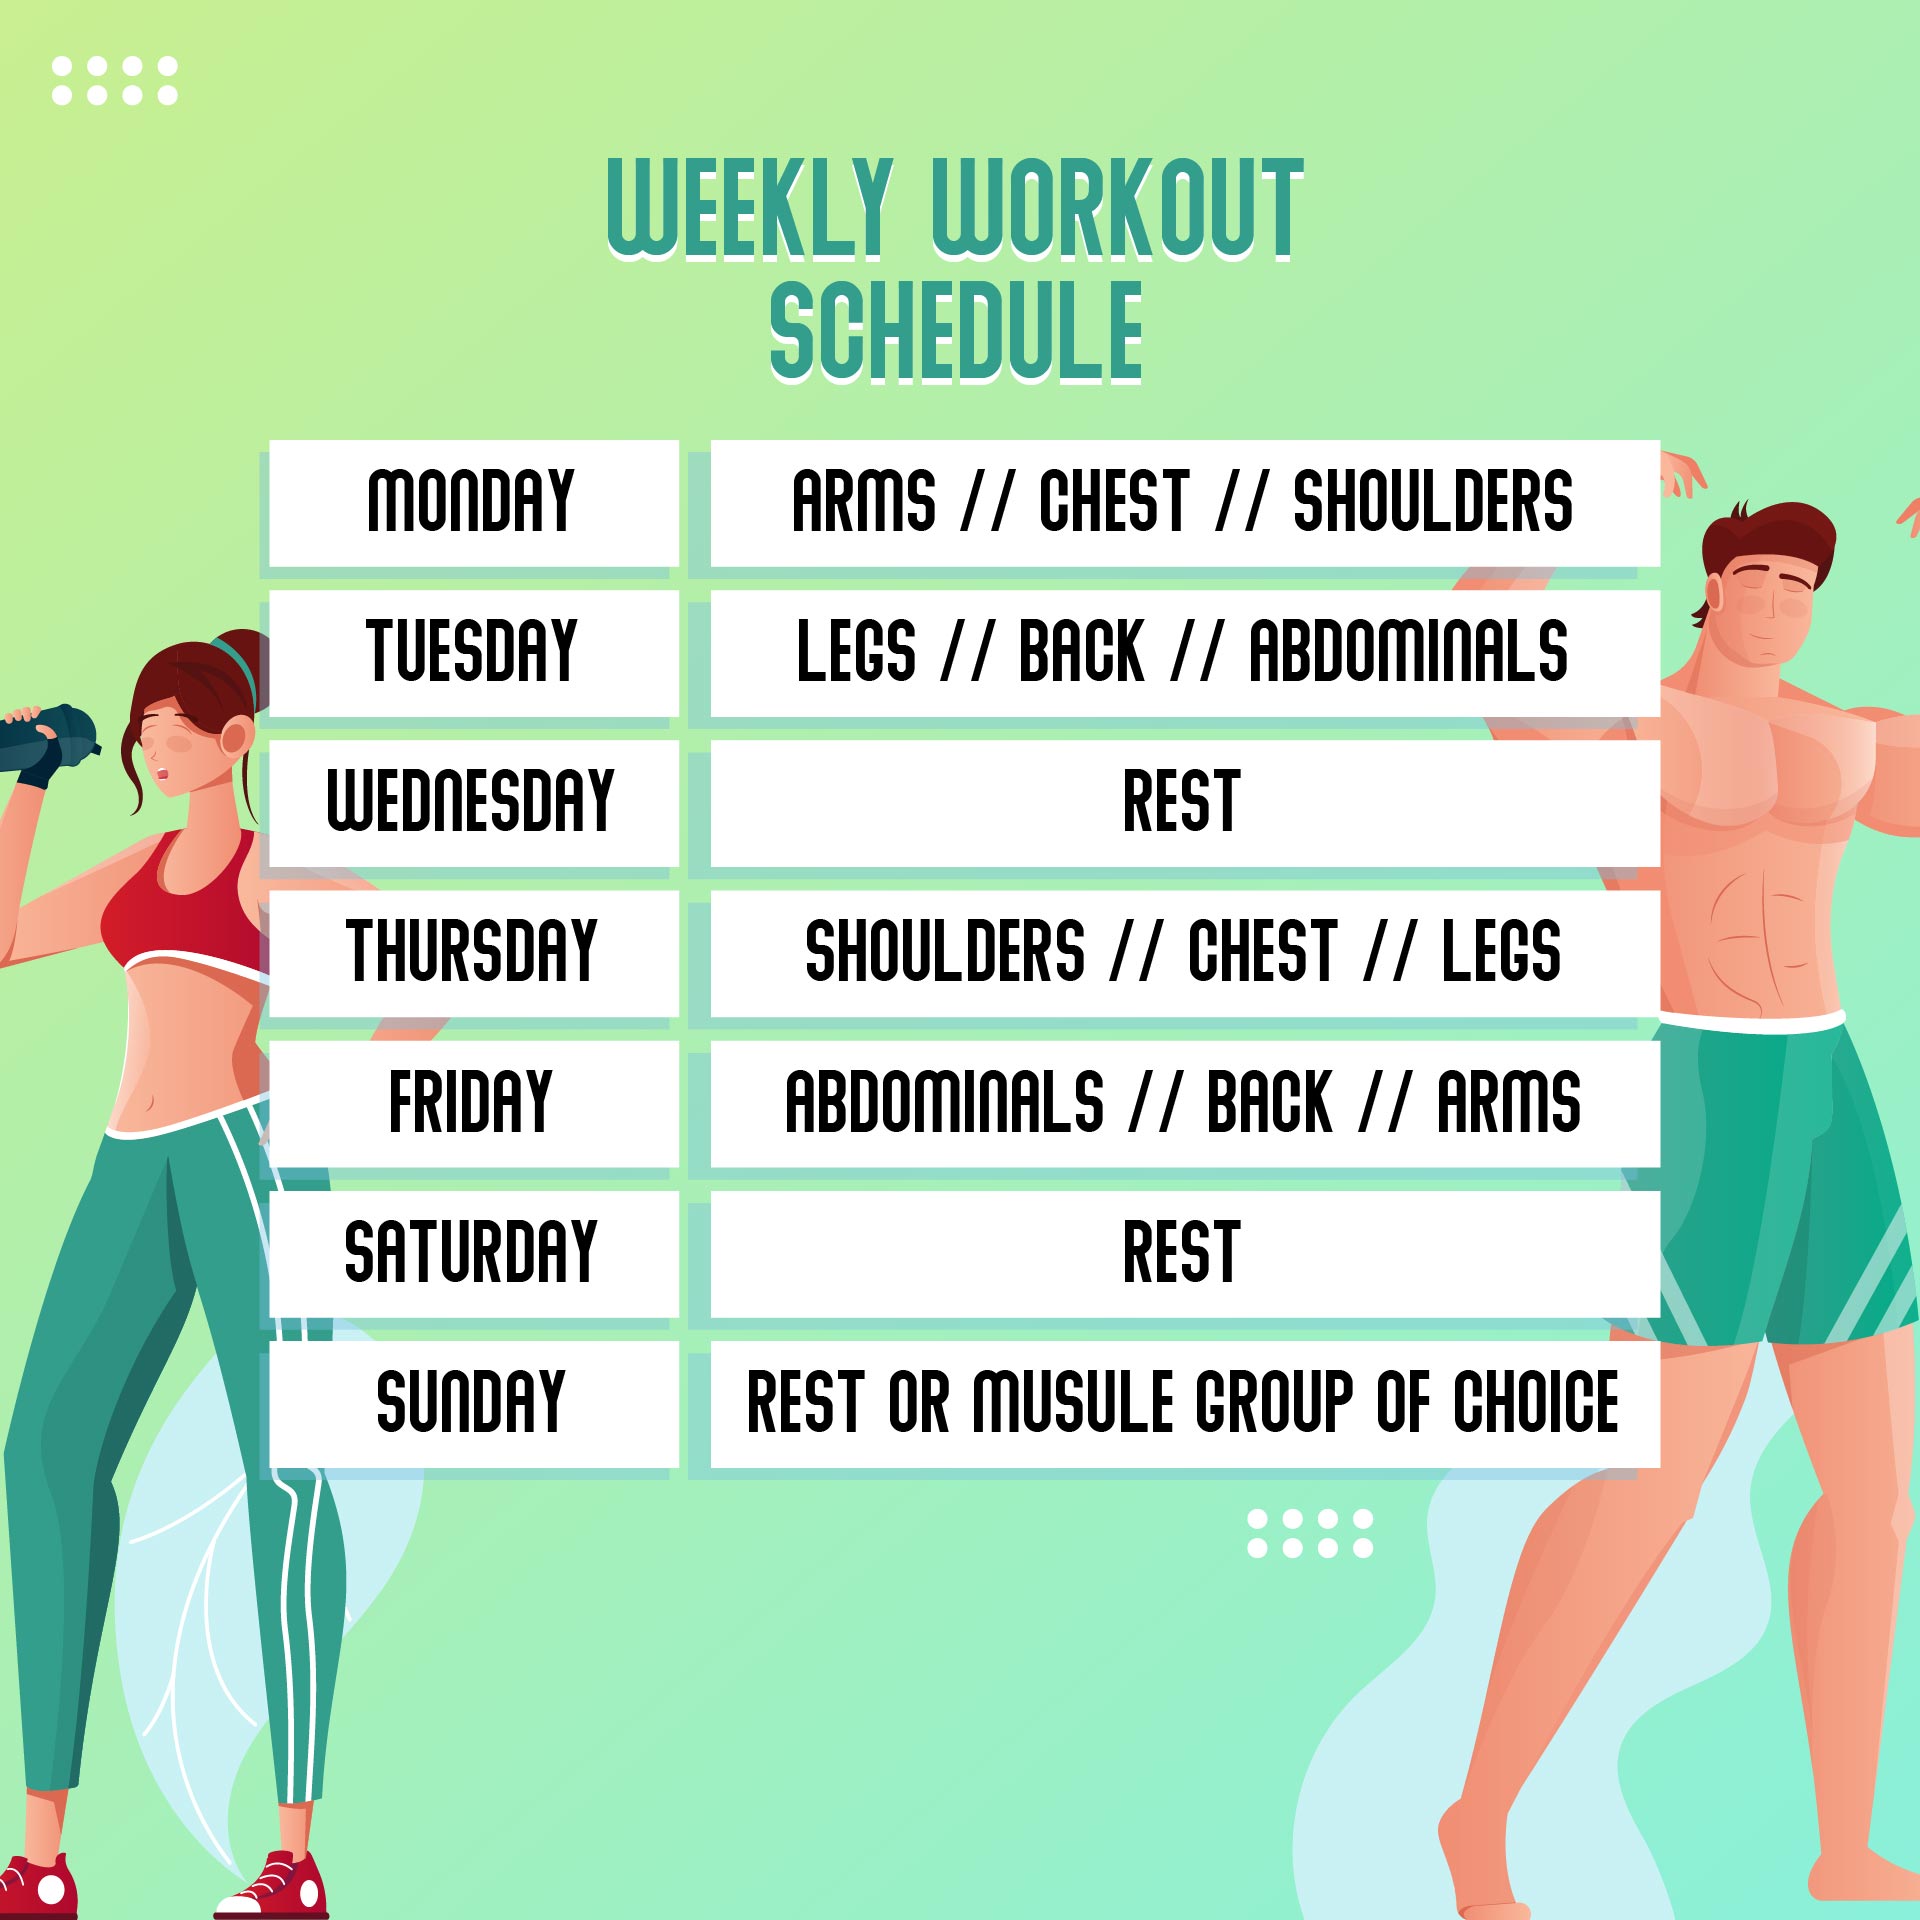 6 Best Images of Free Printable Weekly Workout Schedule - Printable